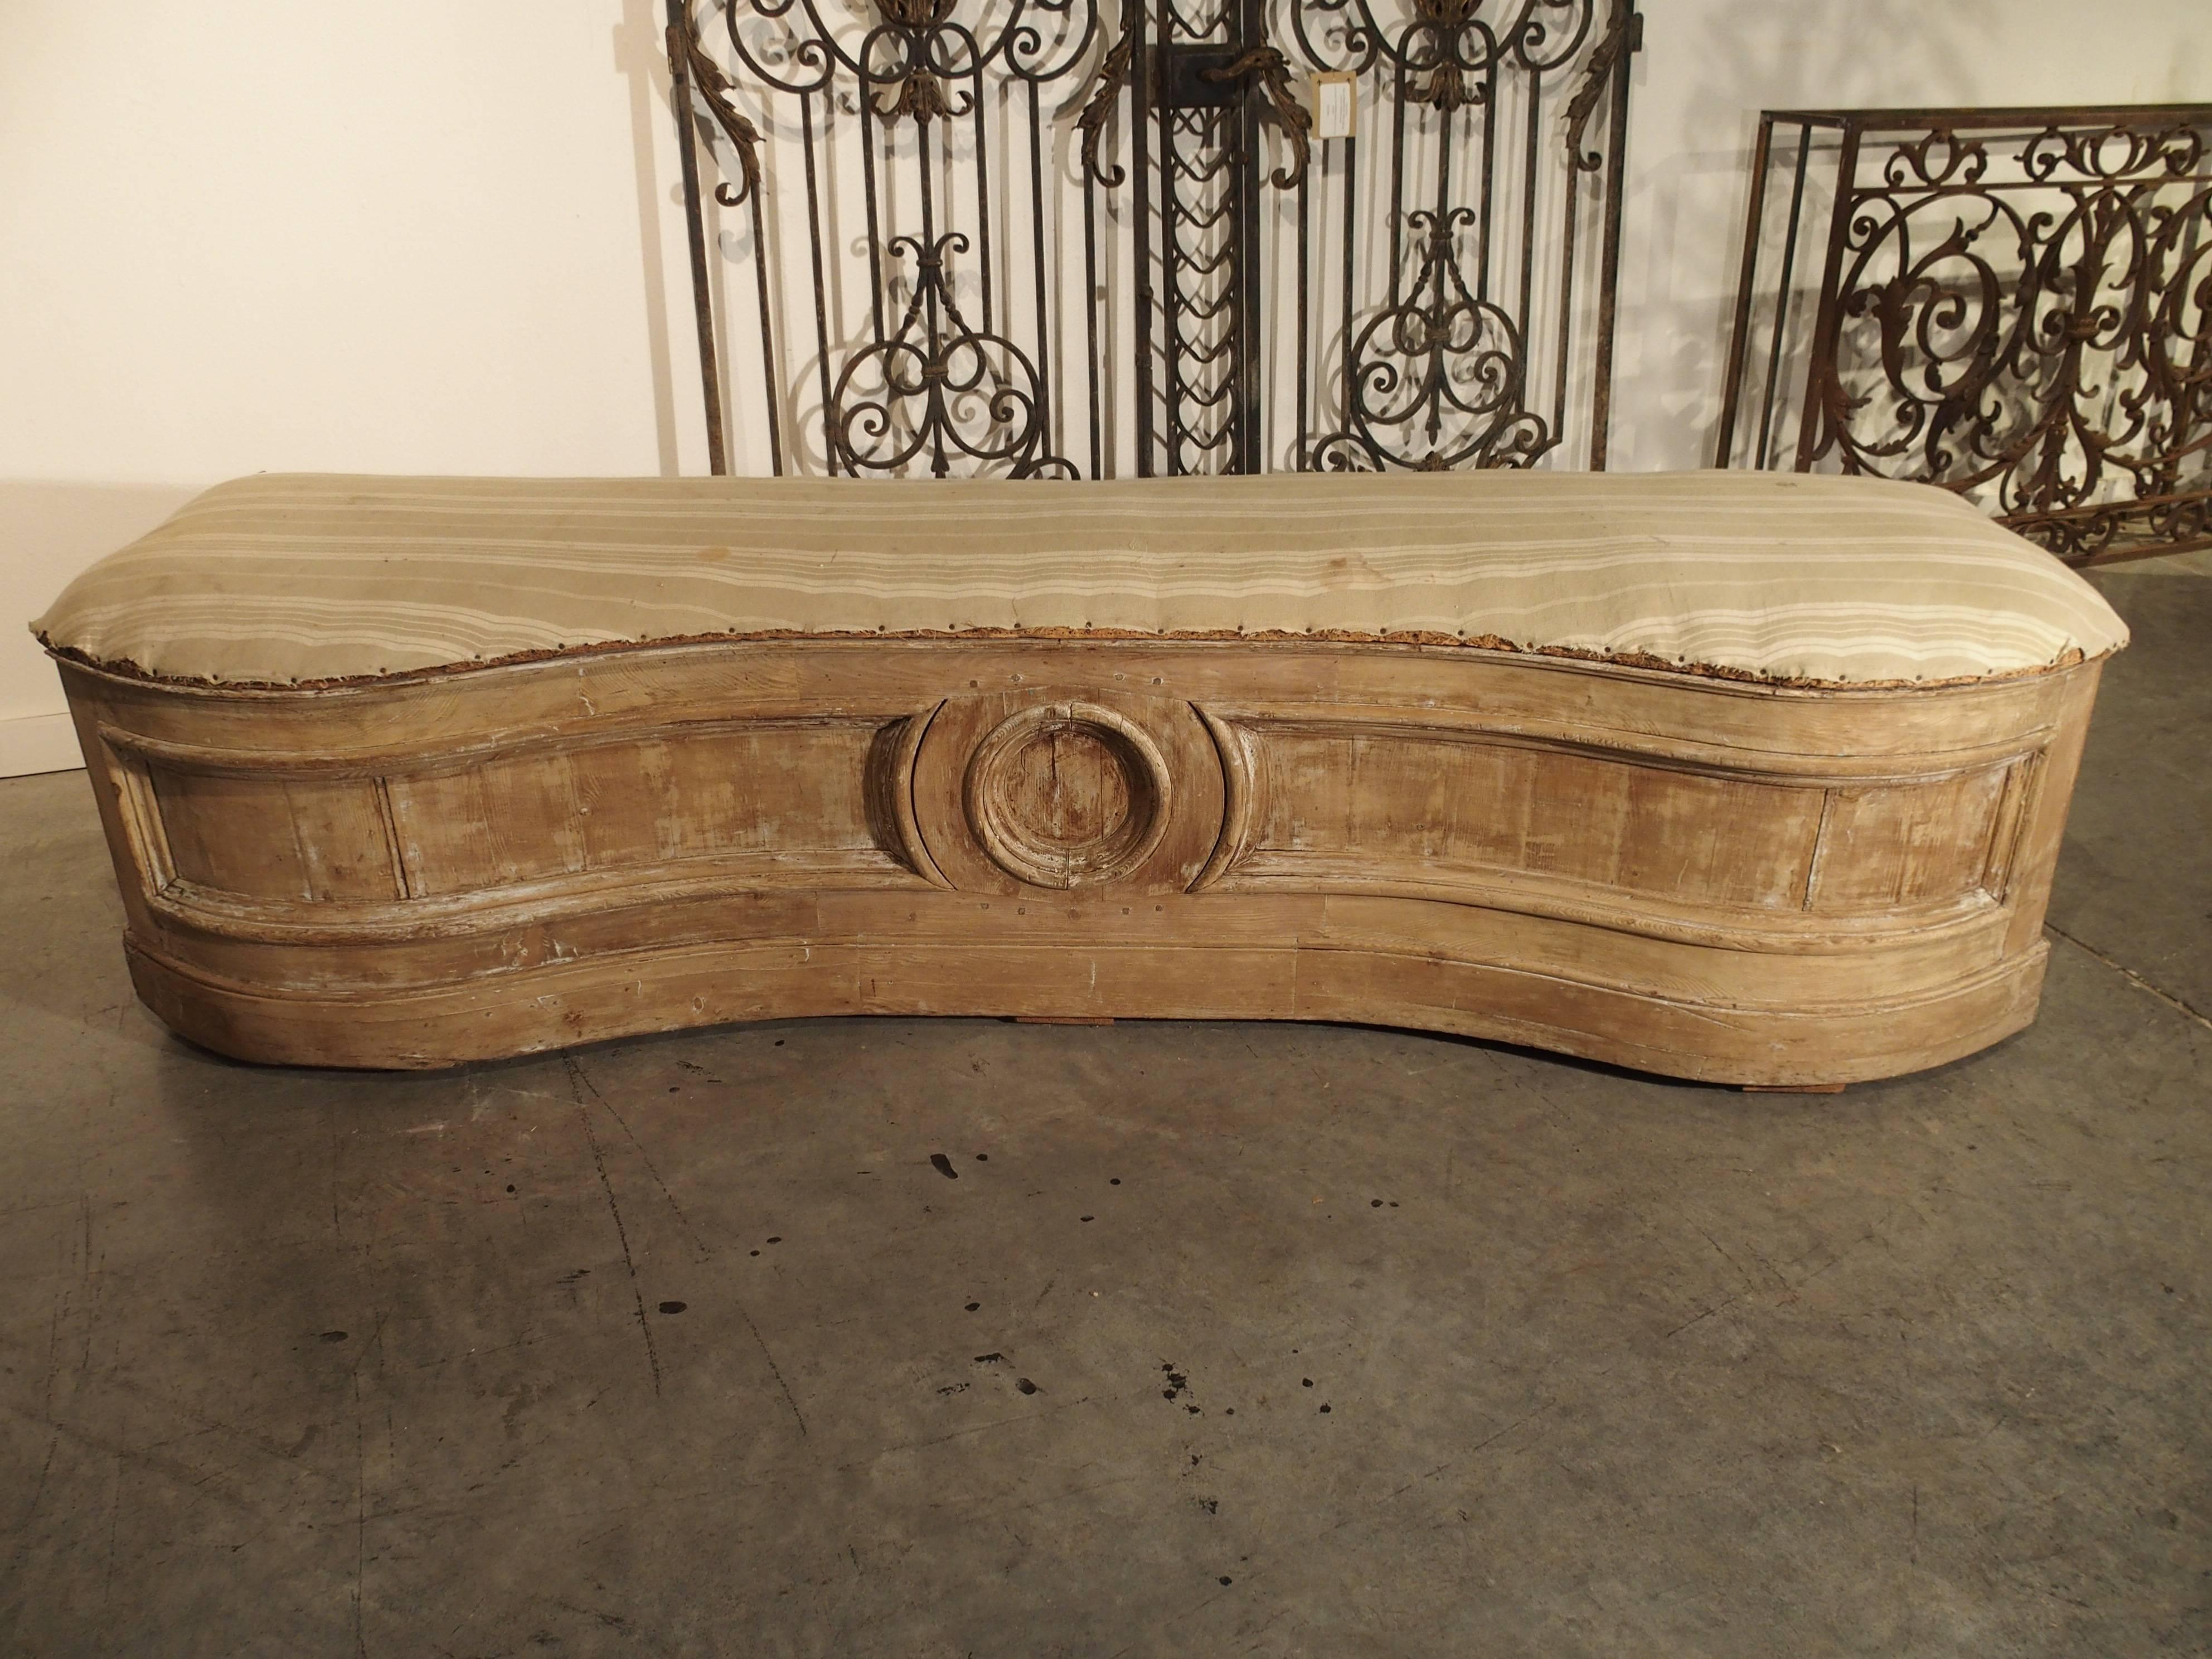 18th Century and Earlier Unusual Stripped Antique Curved Bench or Trunk from Italy